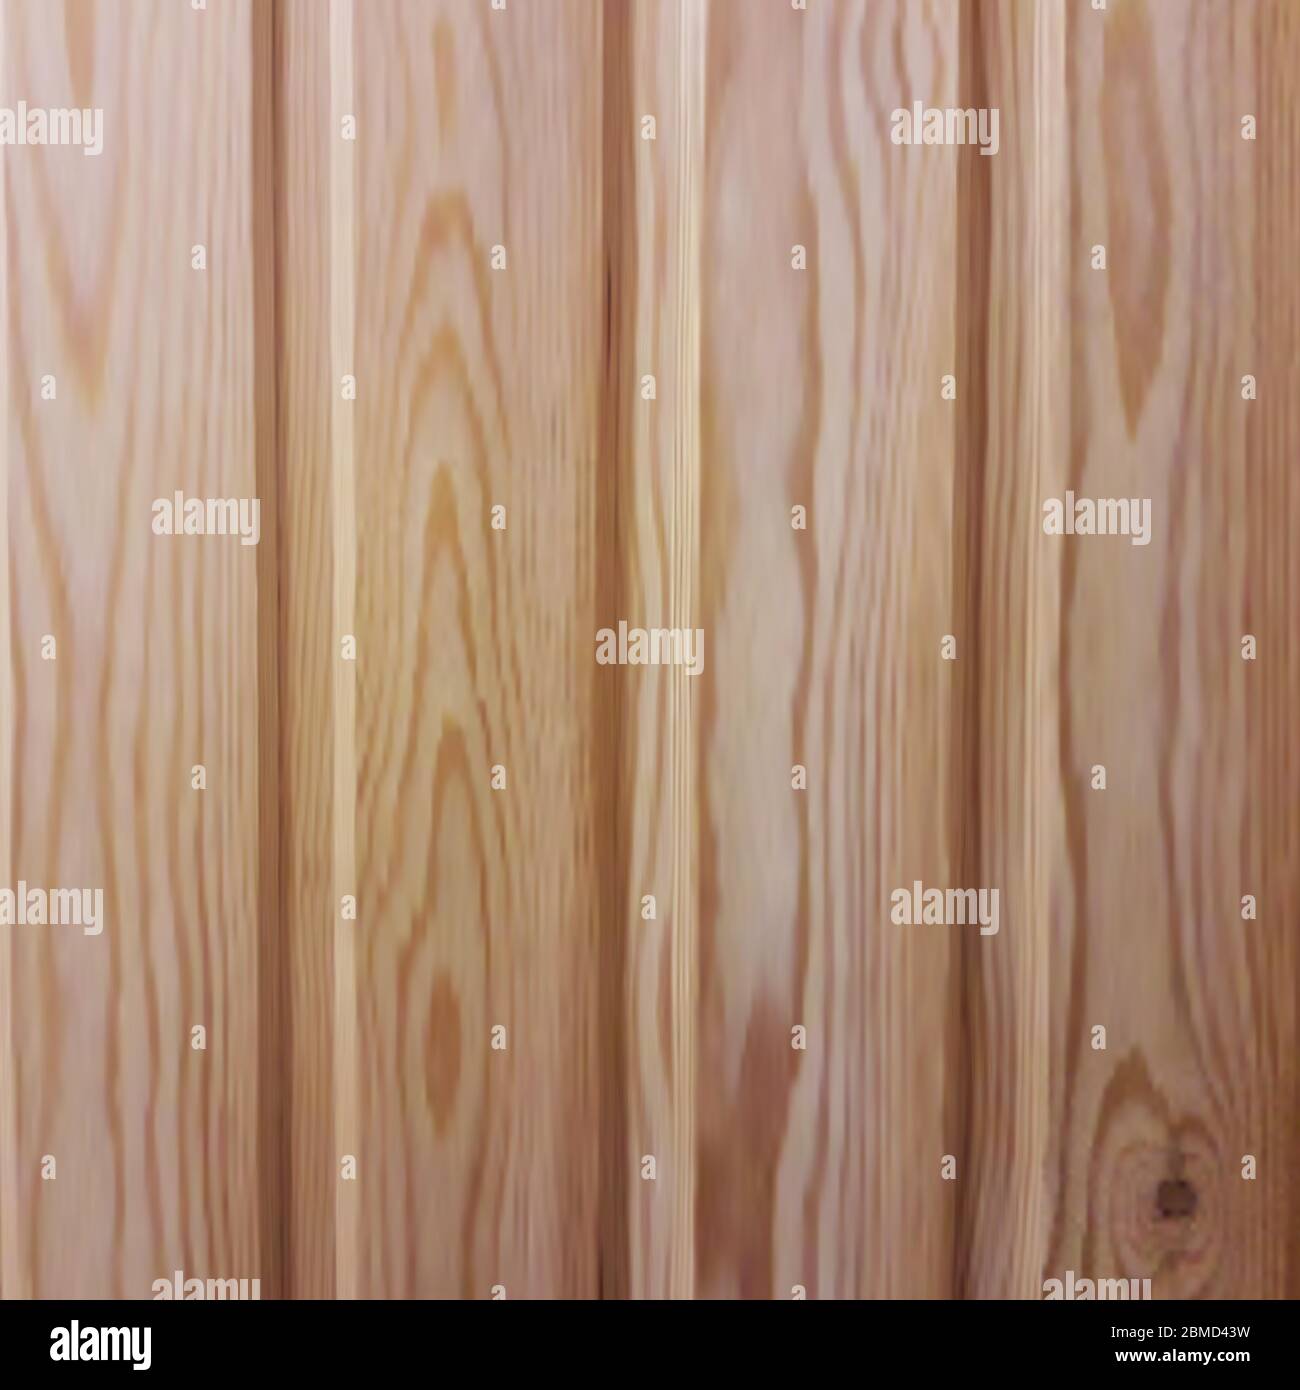 Vector wooden planks in the style of realism. Environmentally friendly lining for saunas and steam rooms.Board background with wooden texture of pine Stock Vector